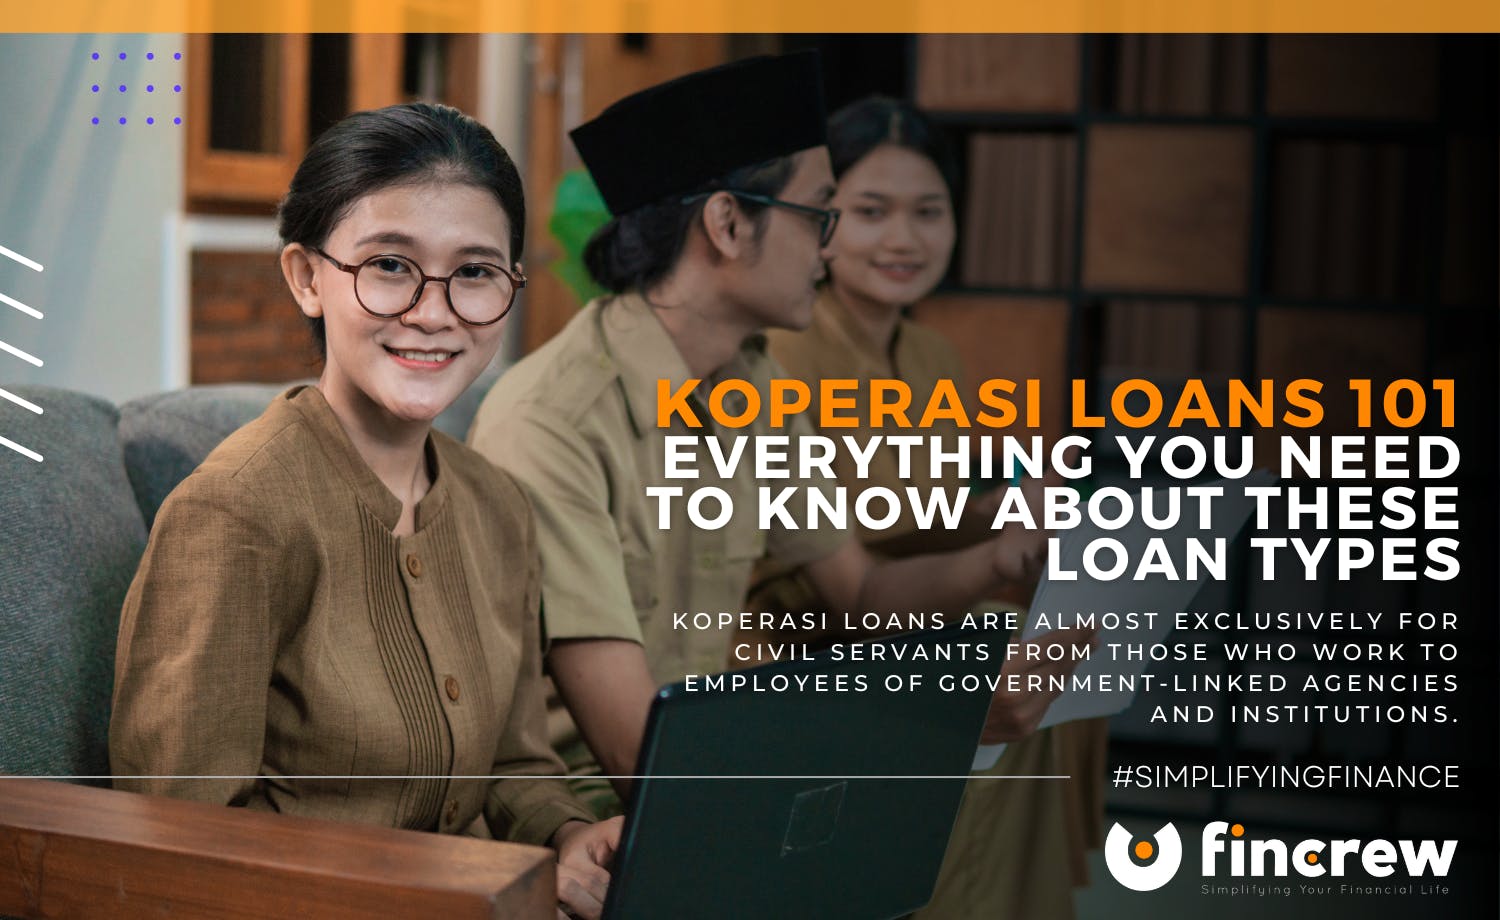 Koperasi Loans 101 – Everything You Need To Know About These Loan Types